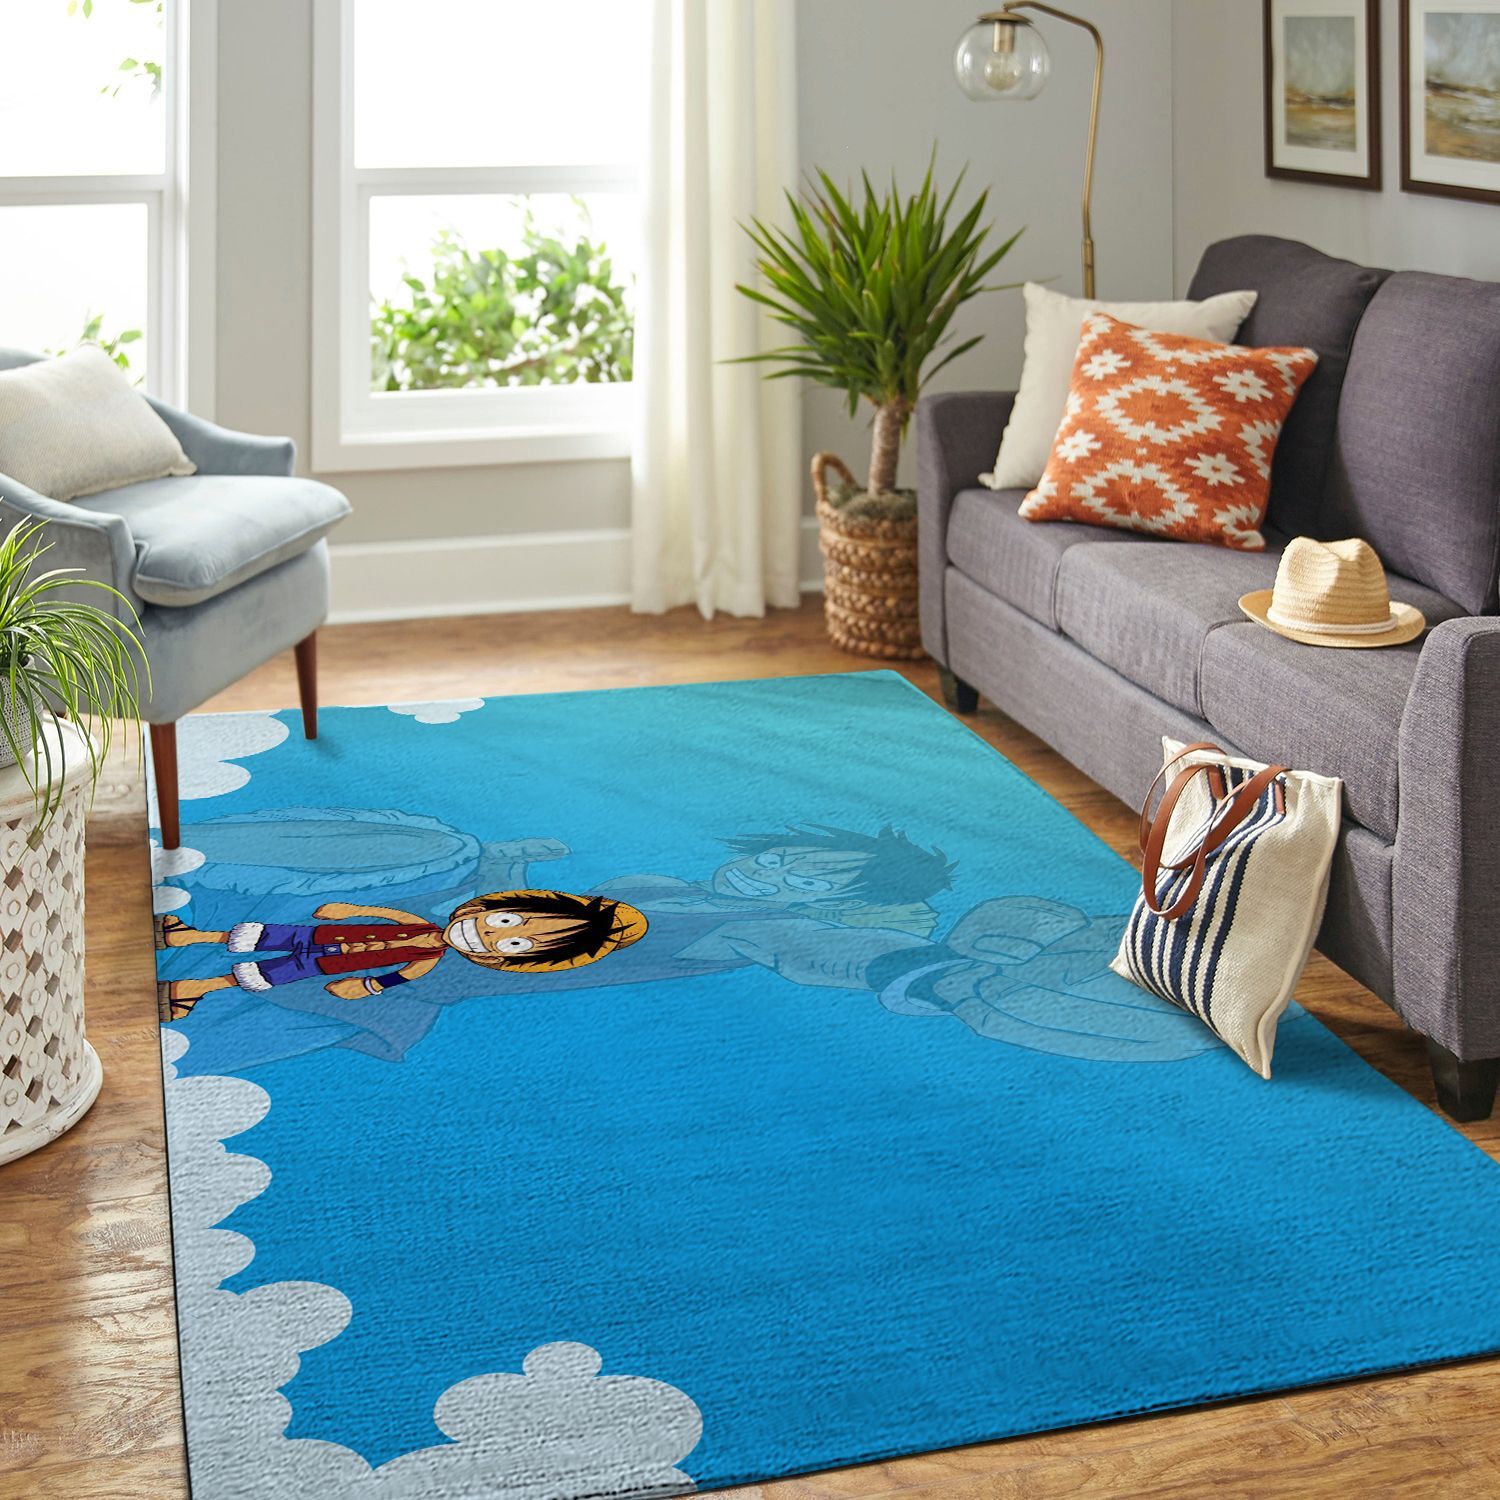 Amazon Onepiece-luffy Living Room Area No6441 Rug